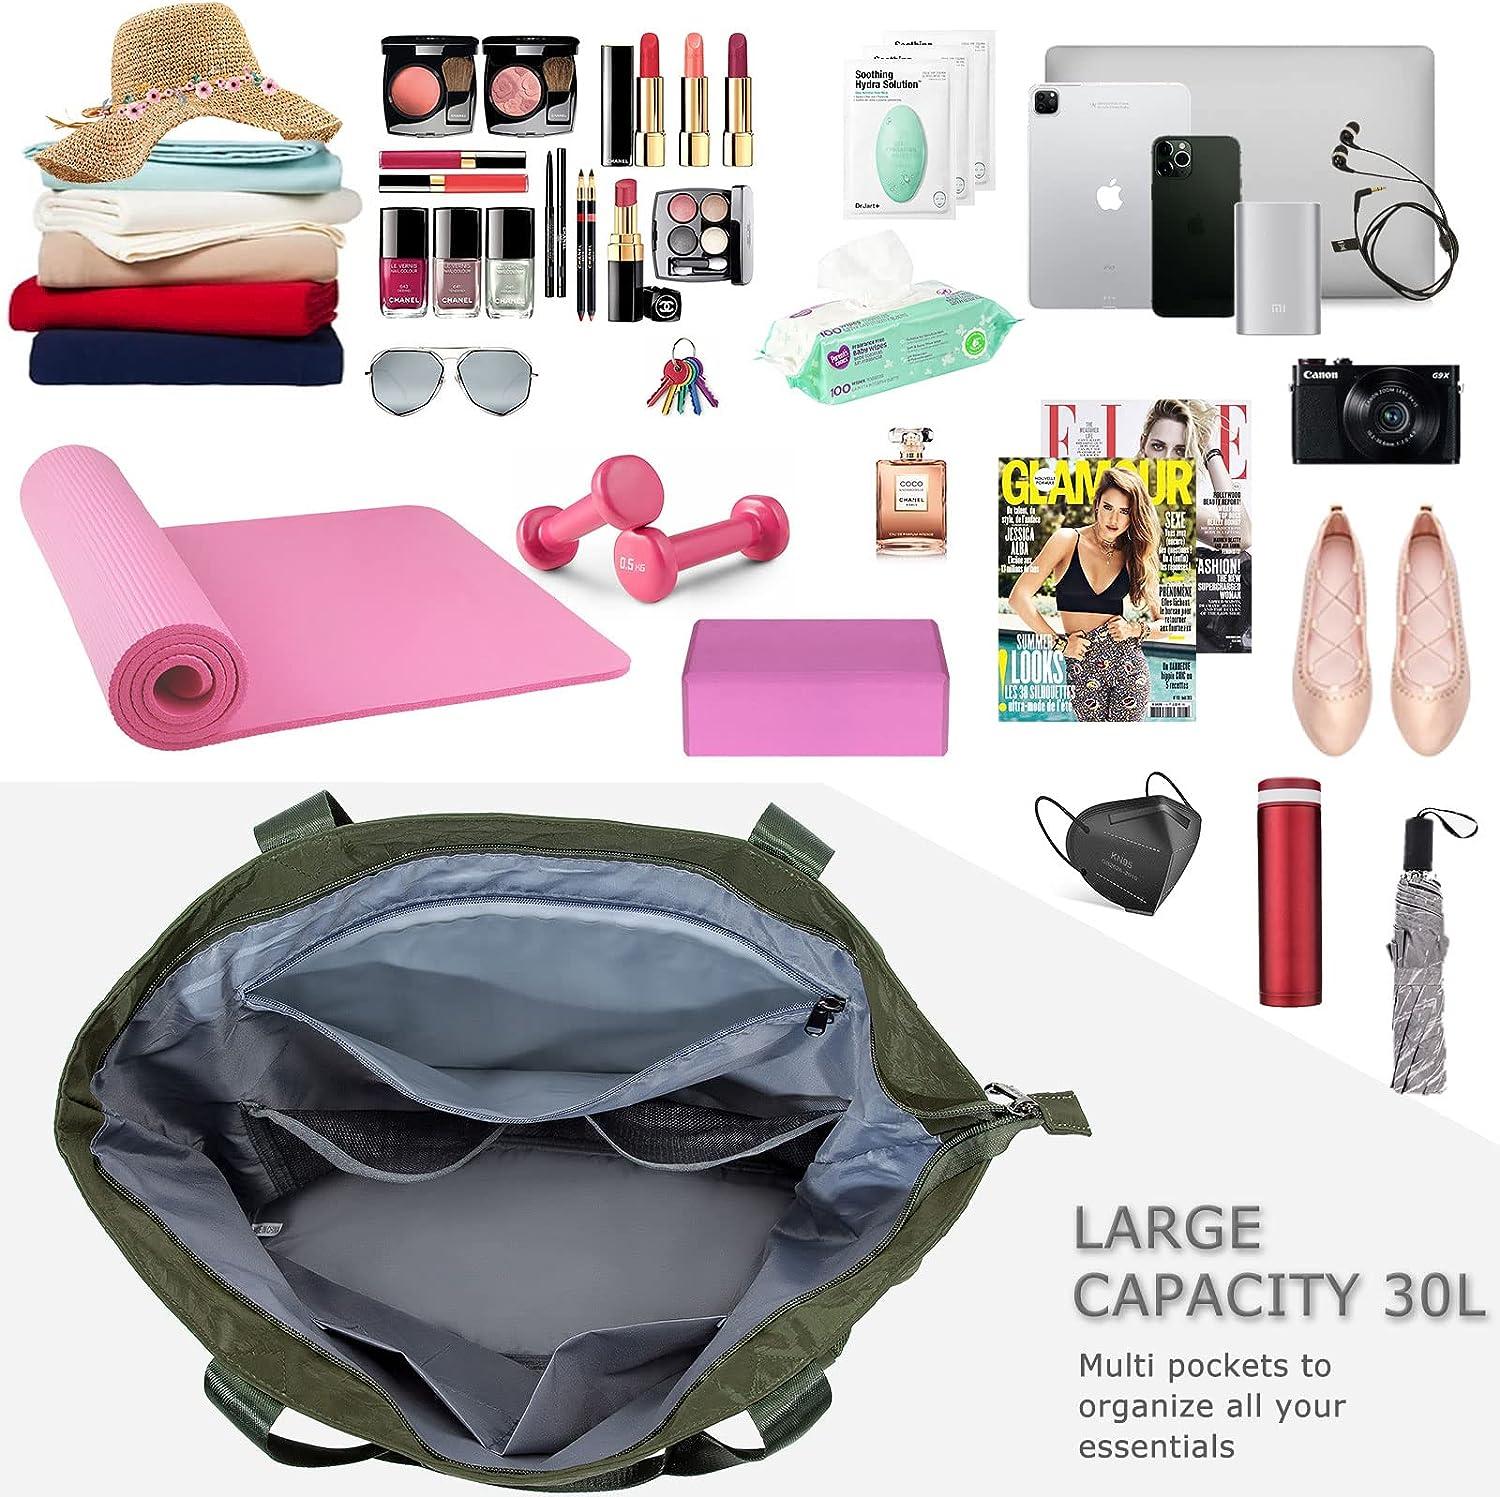 Waterproof Yoga Mat Gym Bag Women With Pocket Ideal For Pilates And Travel  From Yujiliu, $26.89